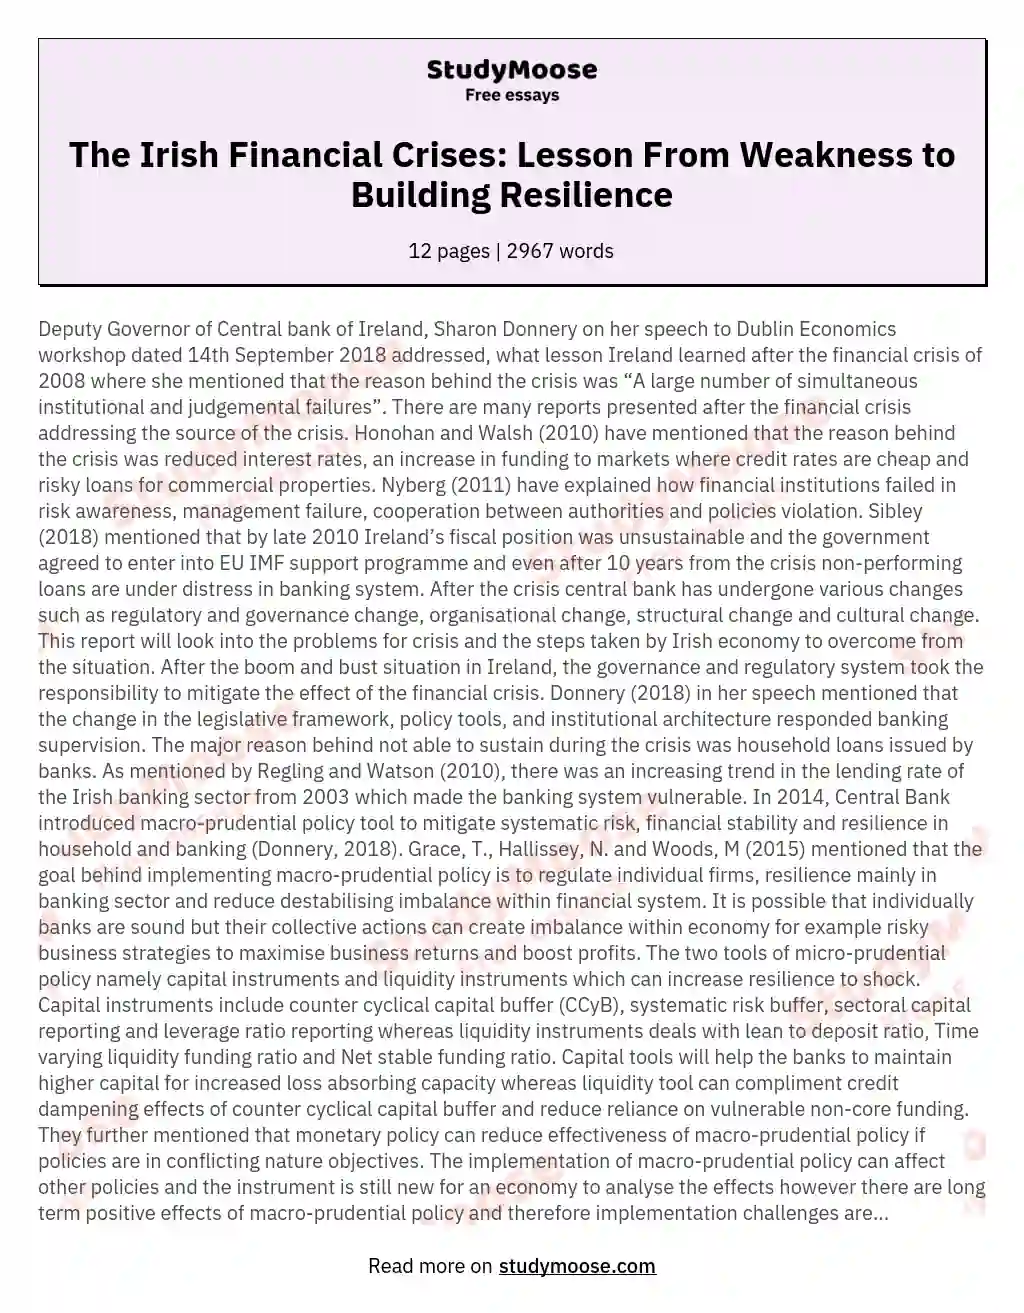 The Irish Financial Crises: Lesson From Weakness to Building Resilience essay